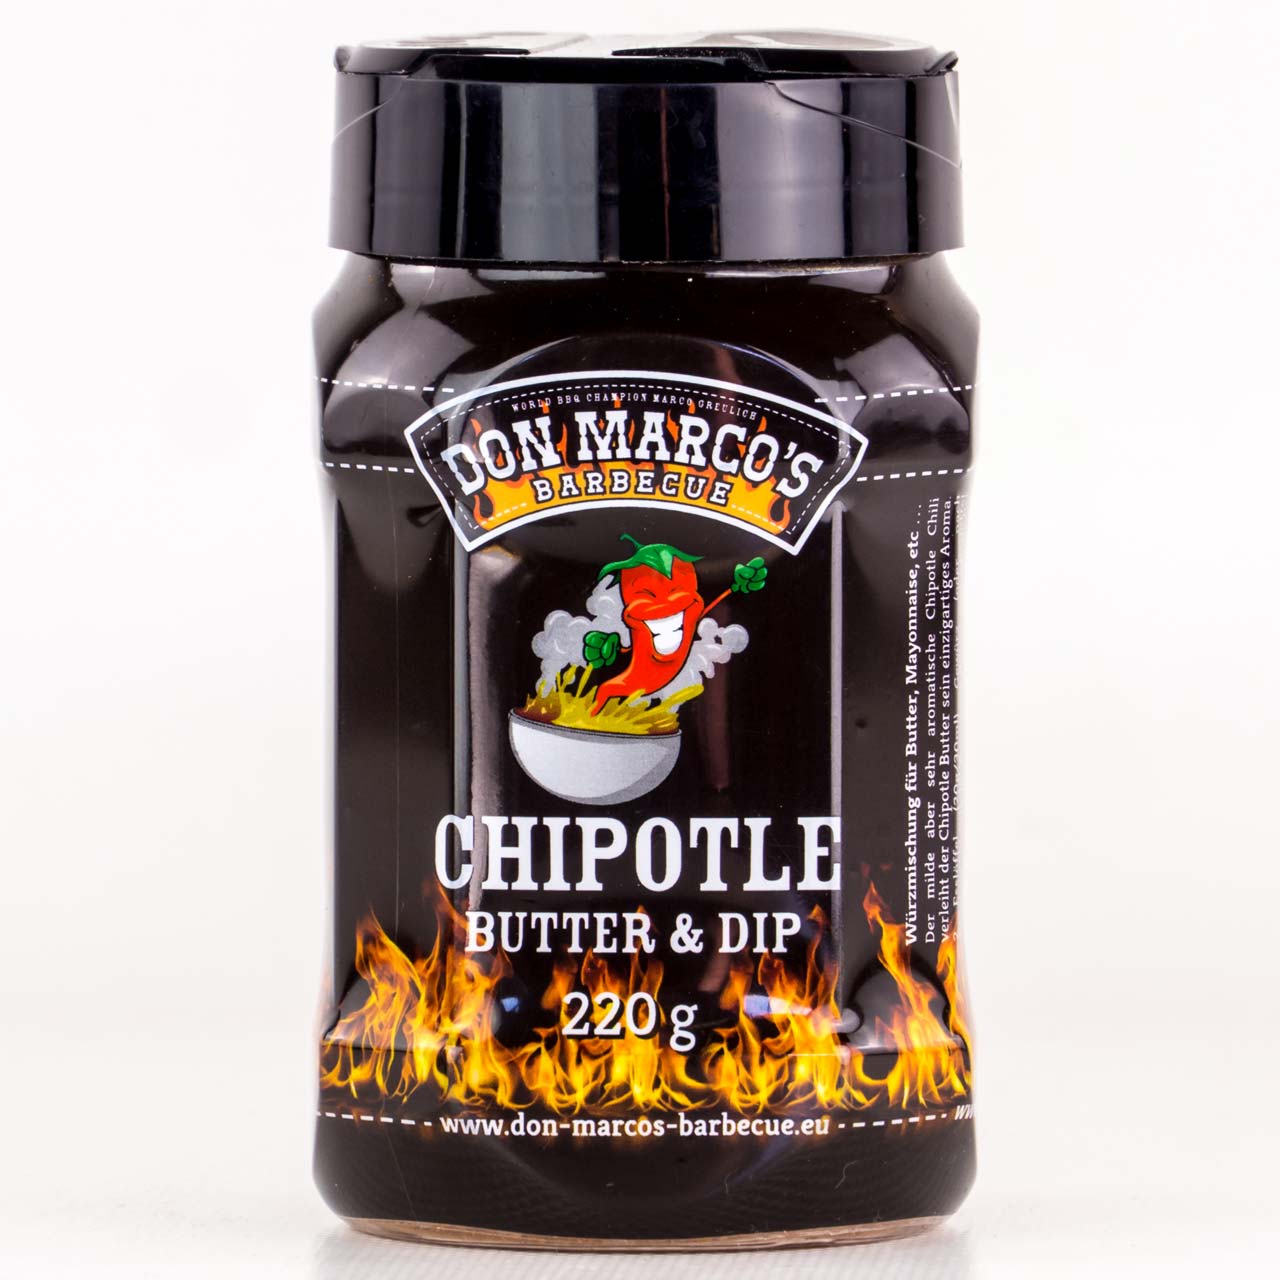 Don Marco's Chipotle Butter & Dip 220g Streuer